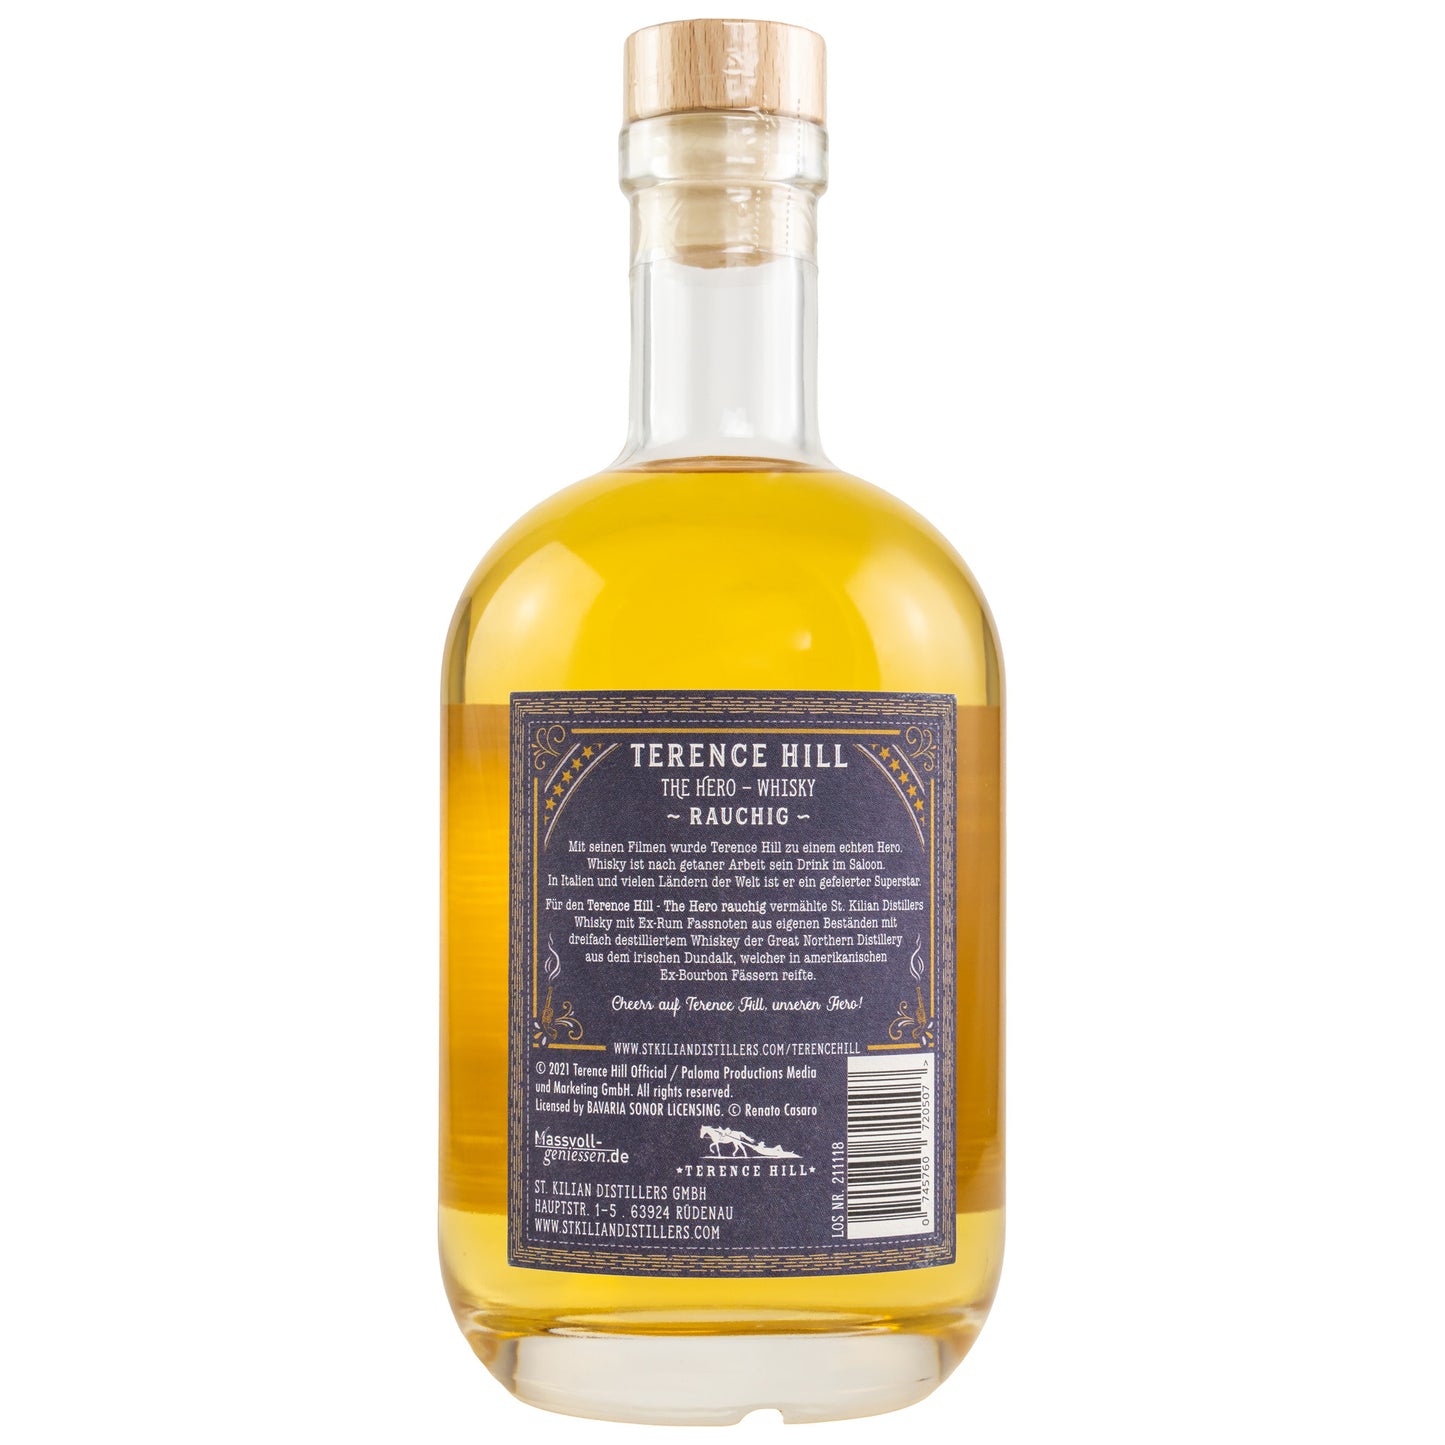 TERENCE HILL - The Hero Whisky peated - 49% vol. - Schwarzbach Spirits